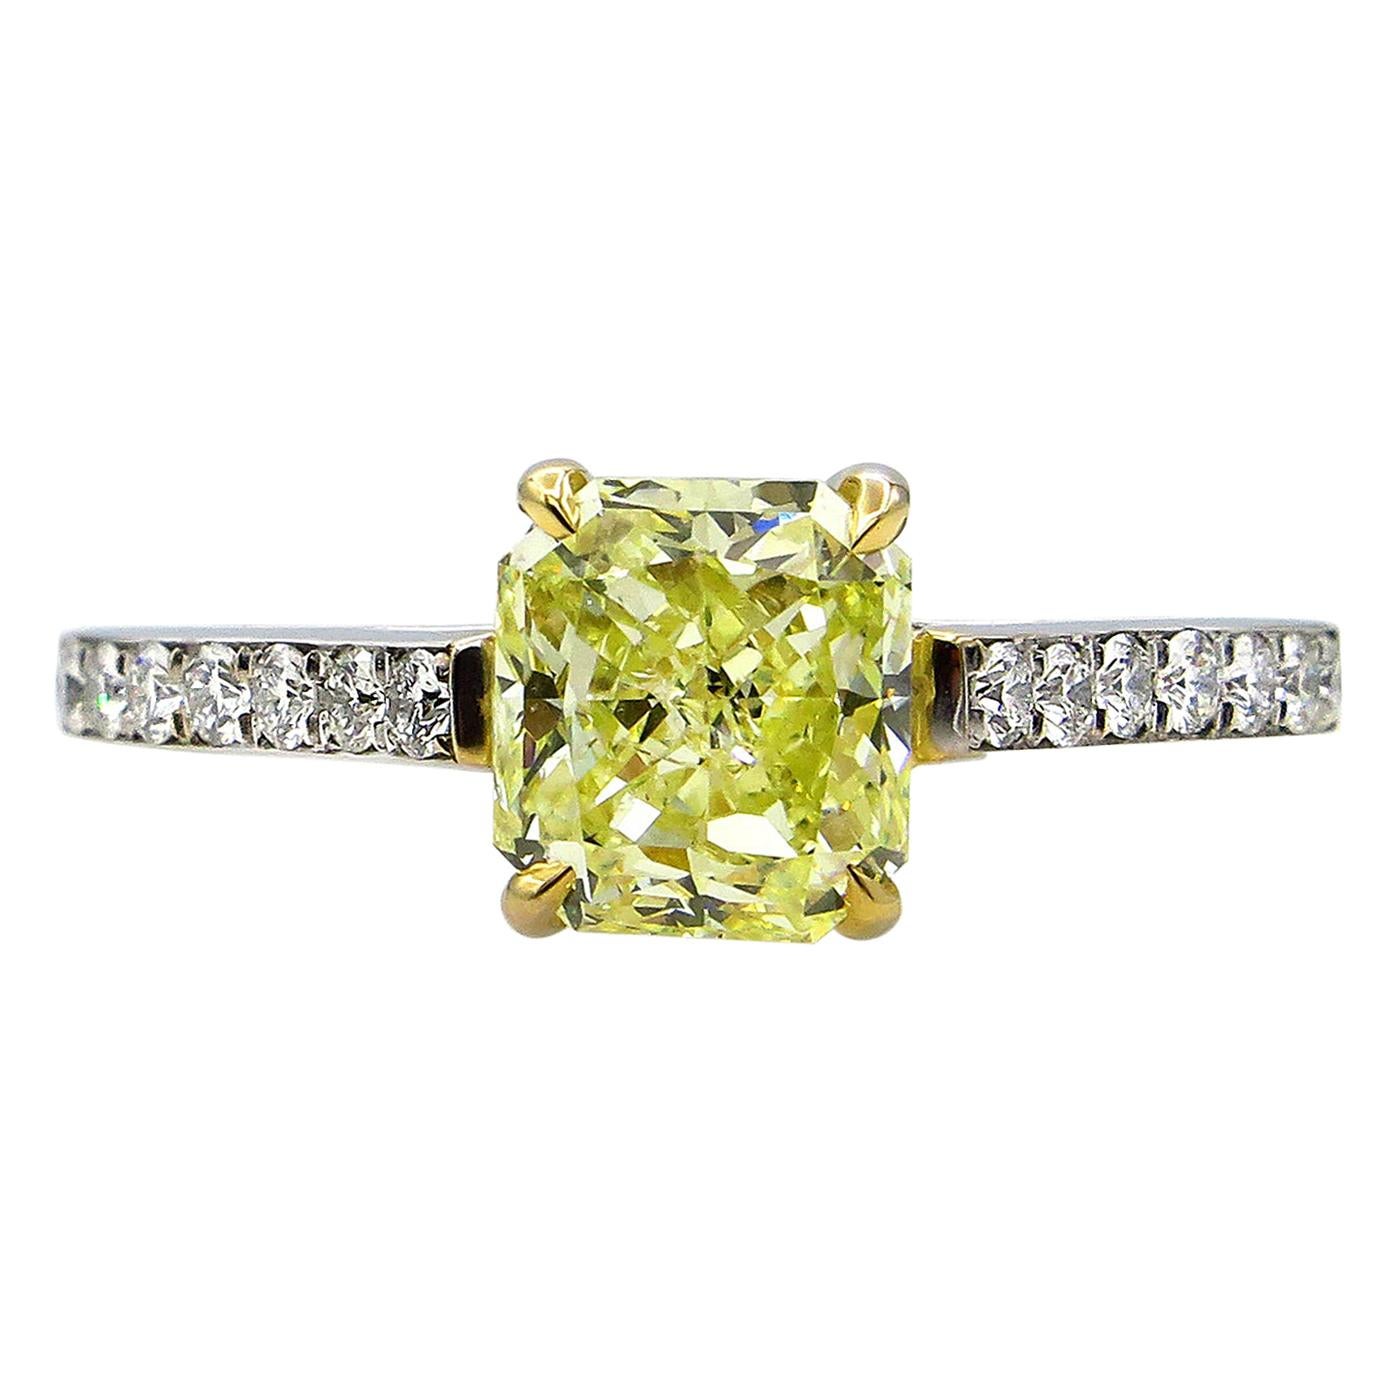 GIA 1.98 Carat Fancy Yellow Radiant Cut Diamond Solitaire Platinum Ring For Sale